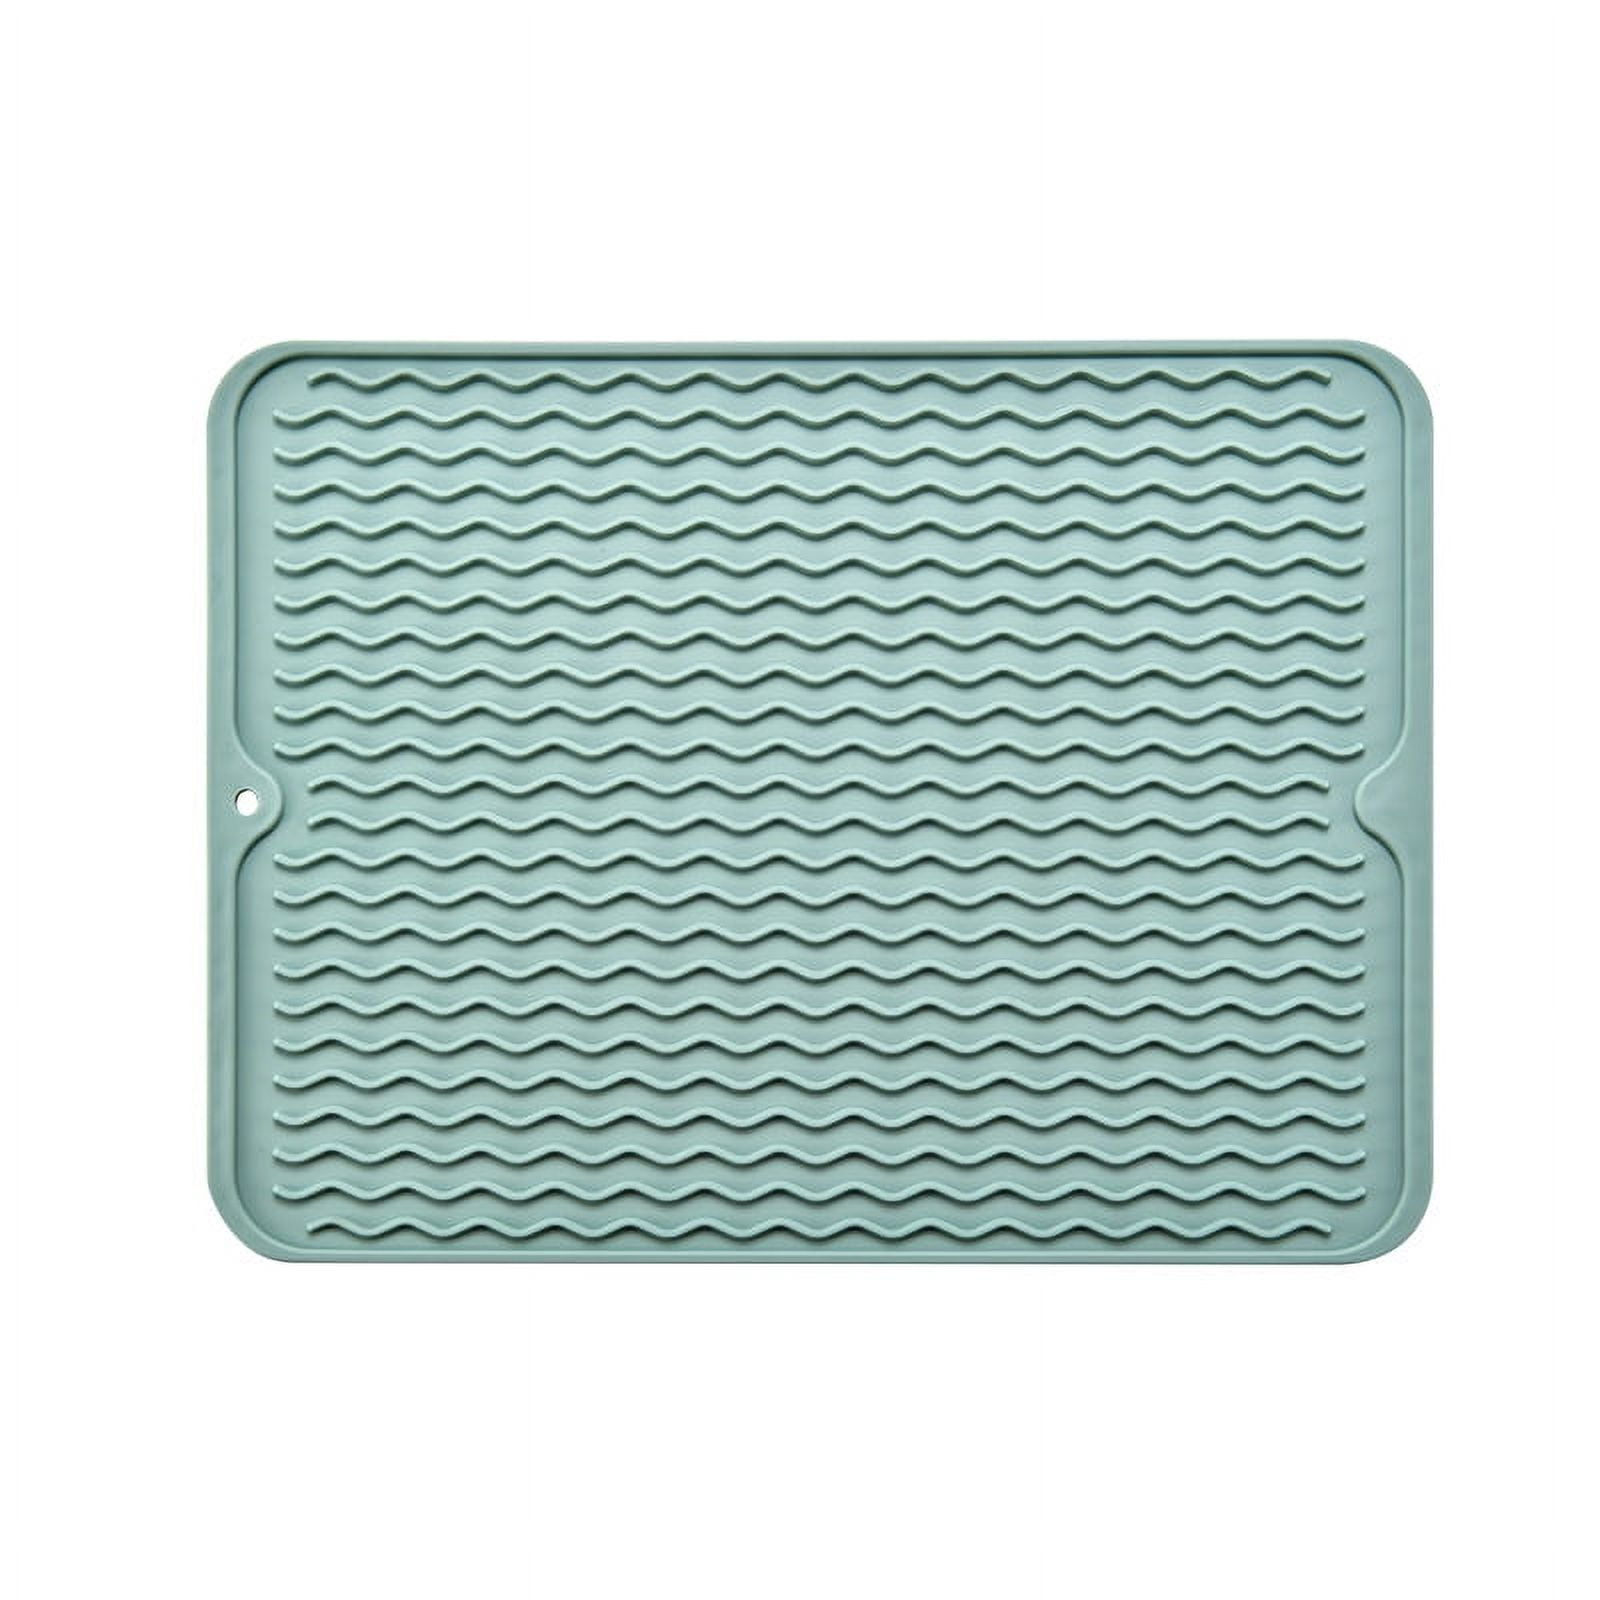 Bueautybox Silicone Trivet, Mat for Hot Pots and Pans, Kitchen Countertop Protector, Heat-Resistant Nonslip Washable Holder Mats, Dishwasher Safe, Jar